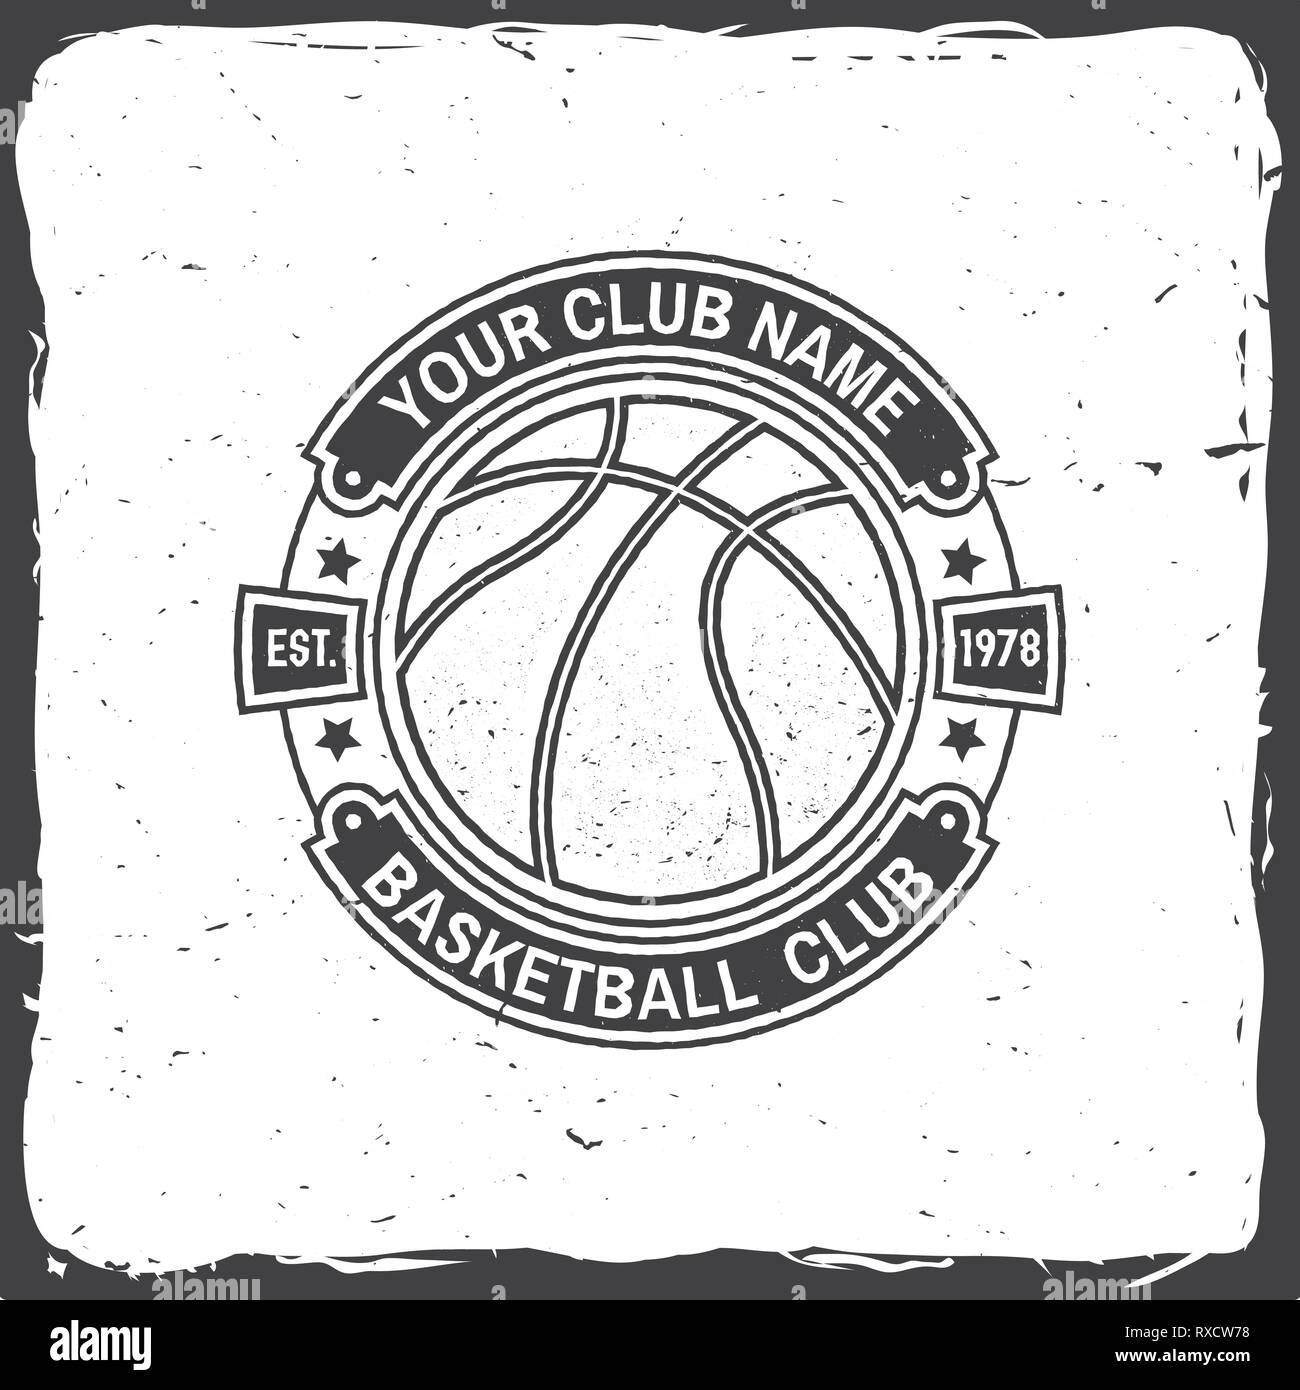 Basketball club badge. Vector illustration. Concept for shirt, print, stamp. Vintage typography design with basketball ring, net and ball silhouette. Stock Vector